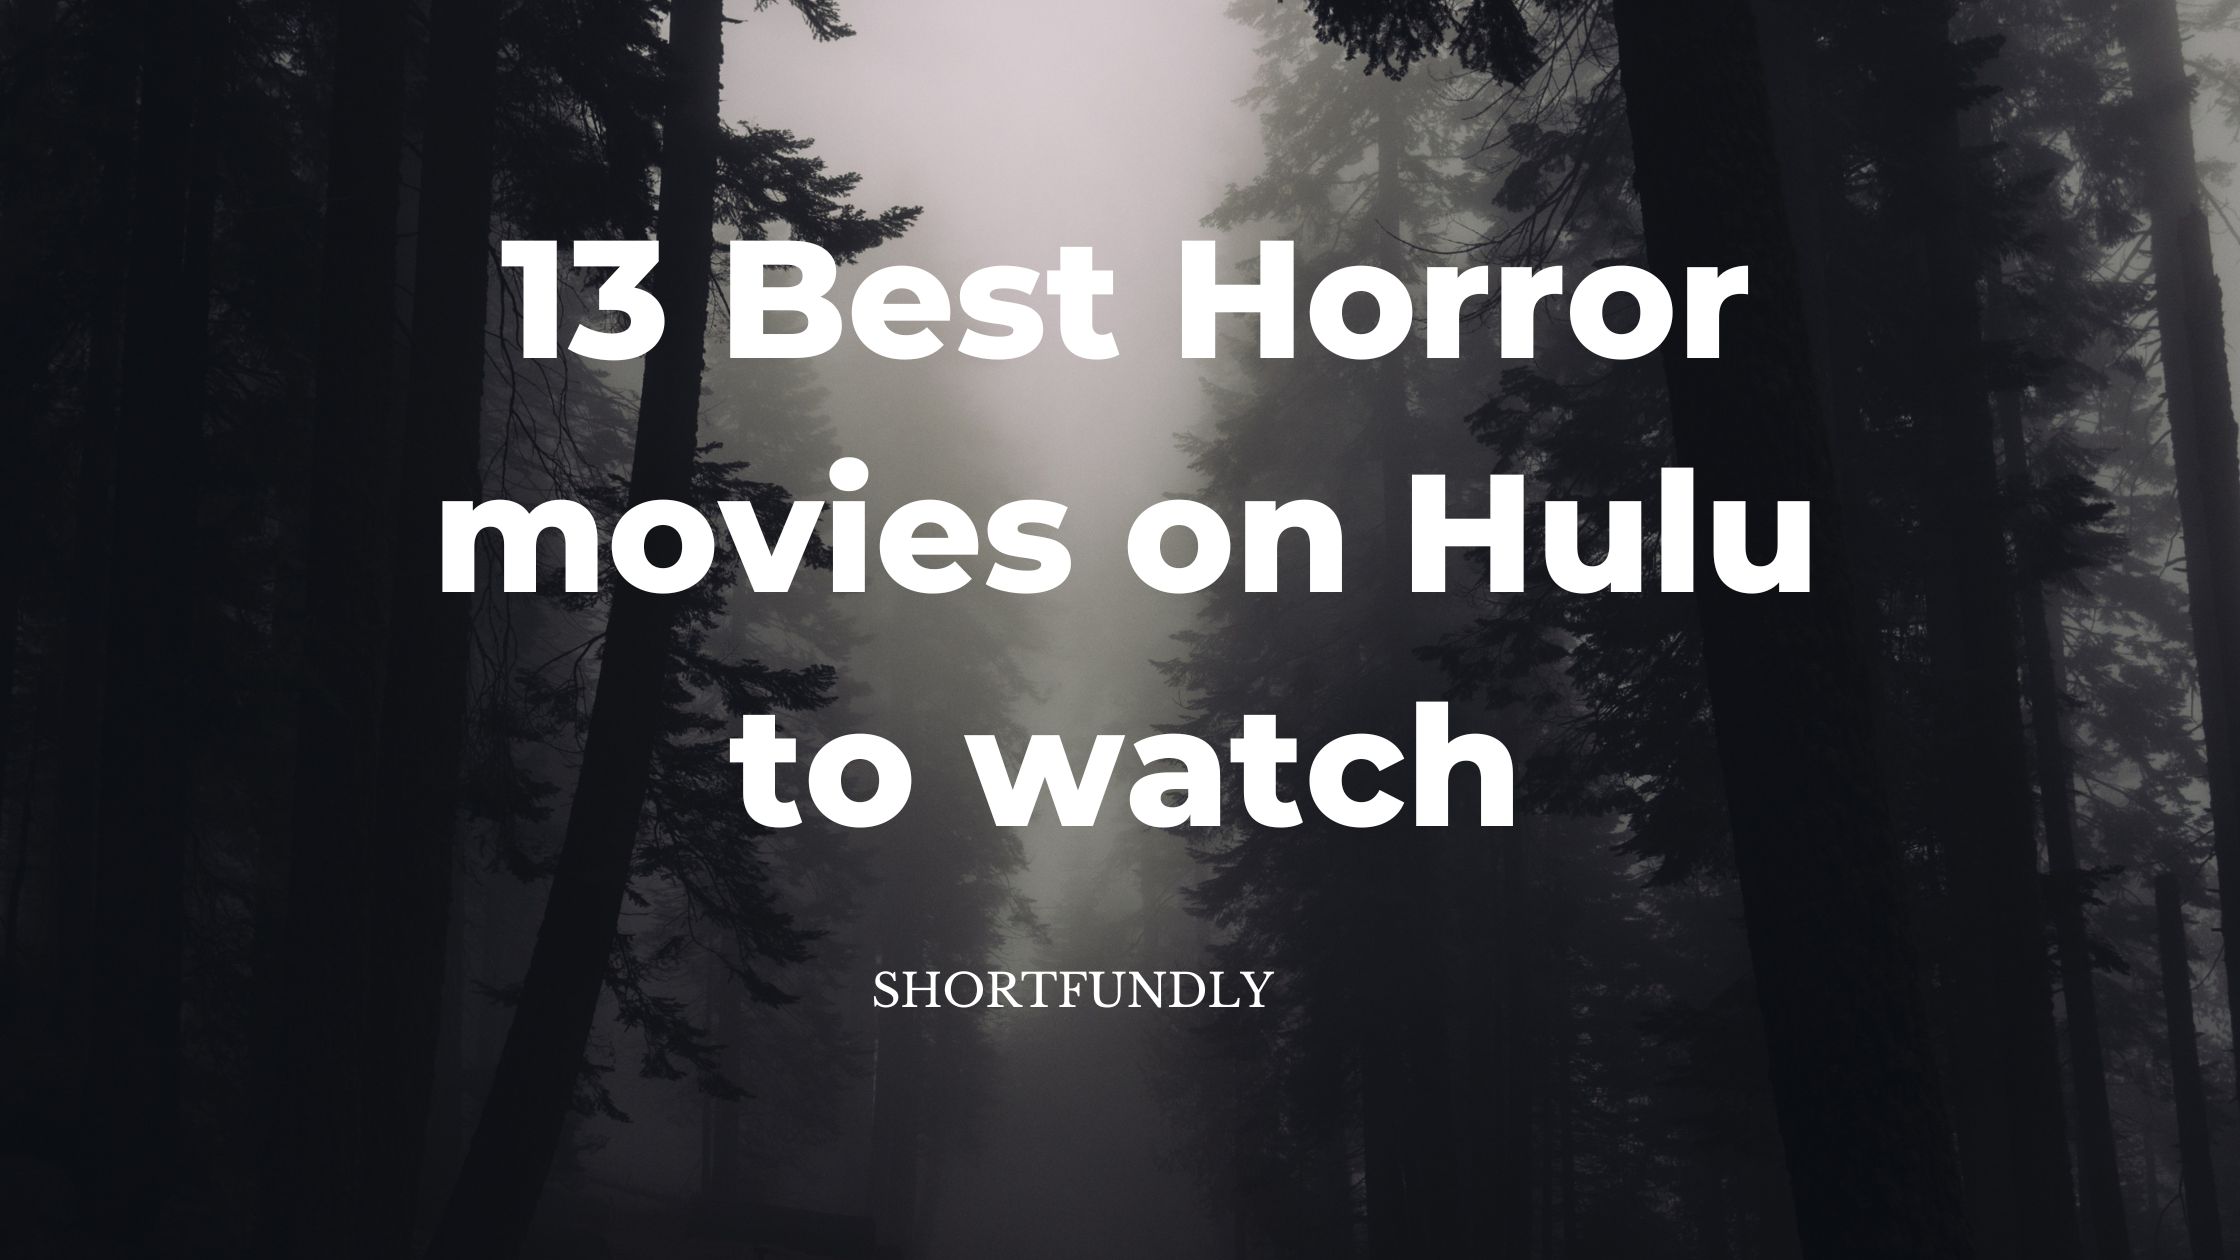 13 Best Horror movies on Hulu to watch